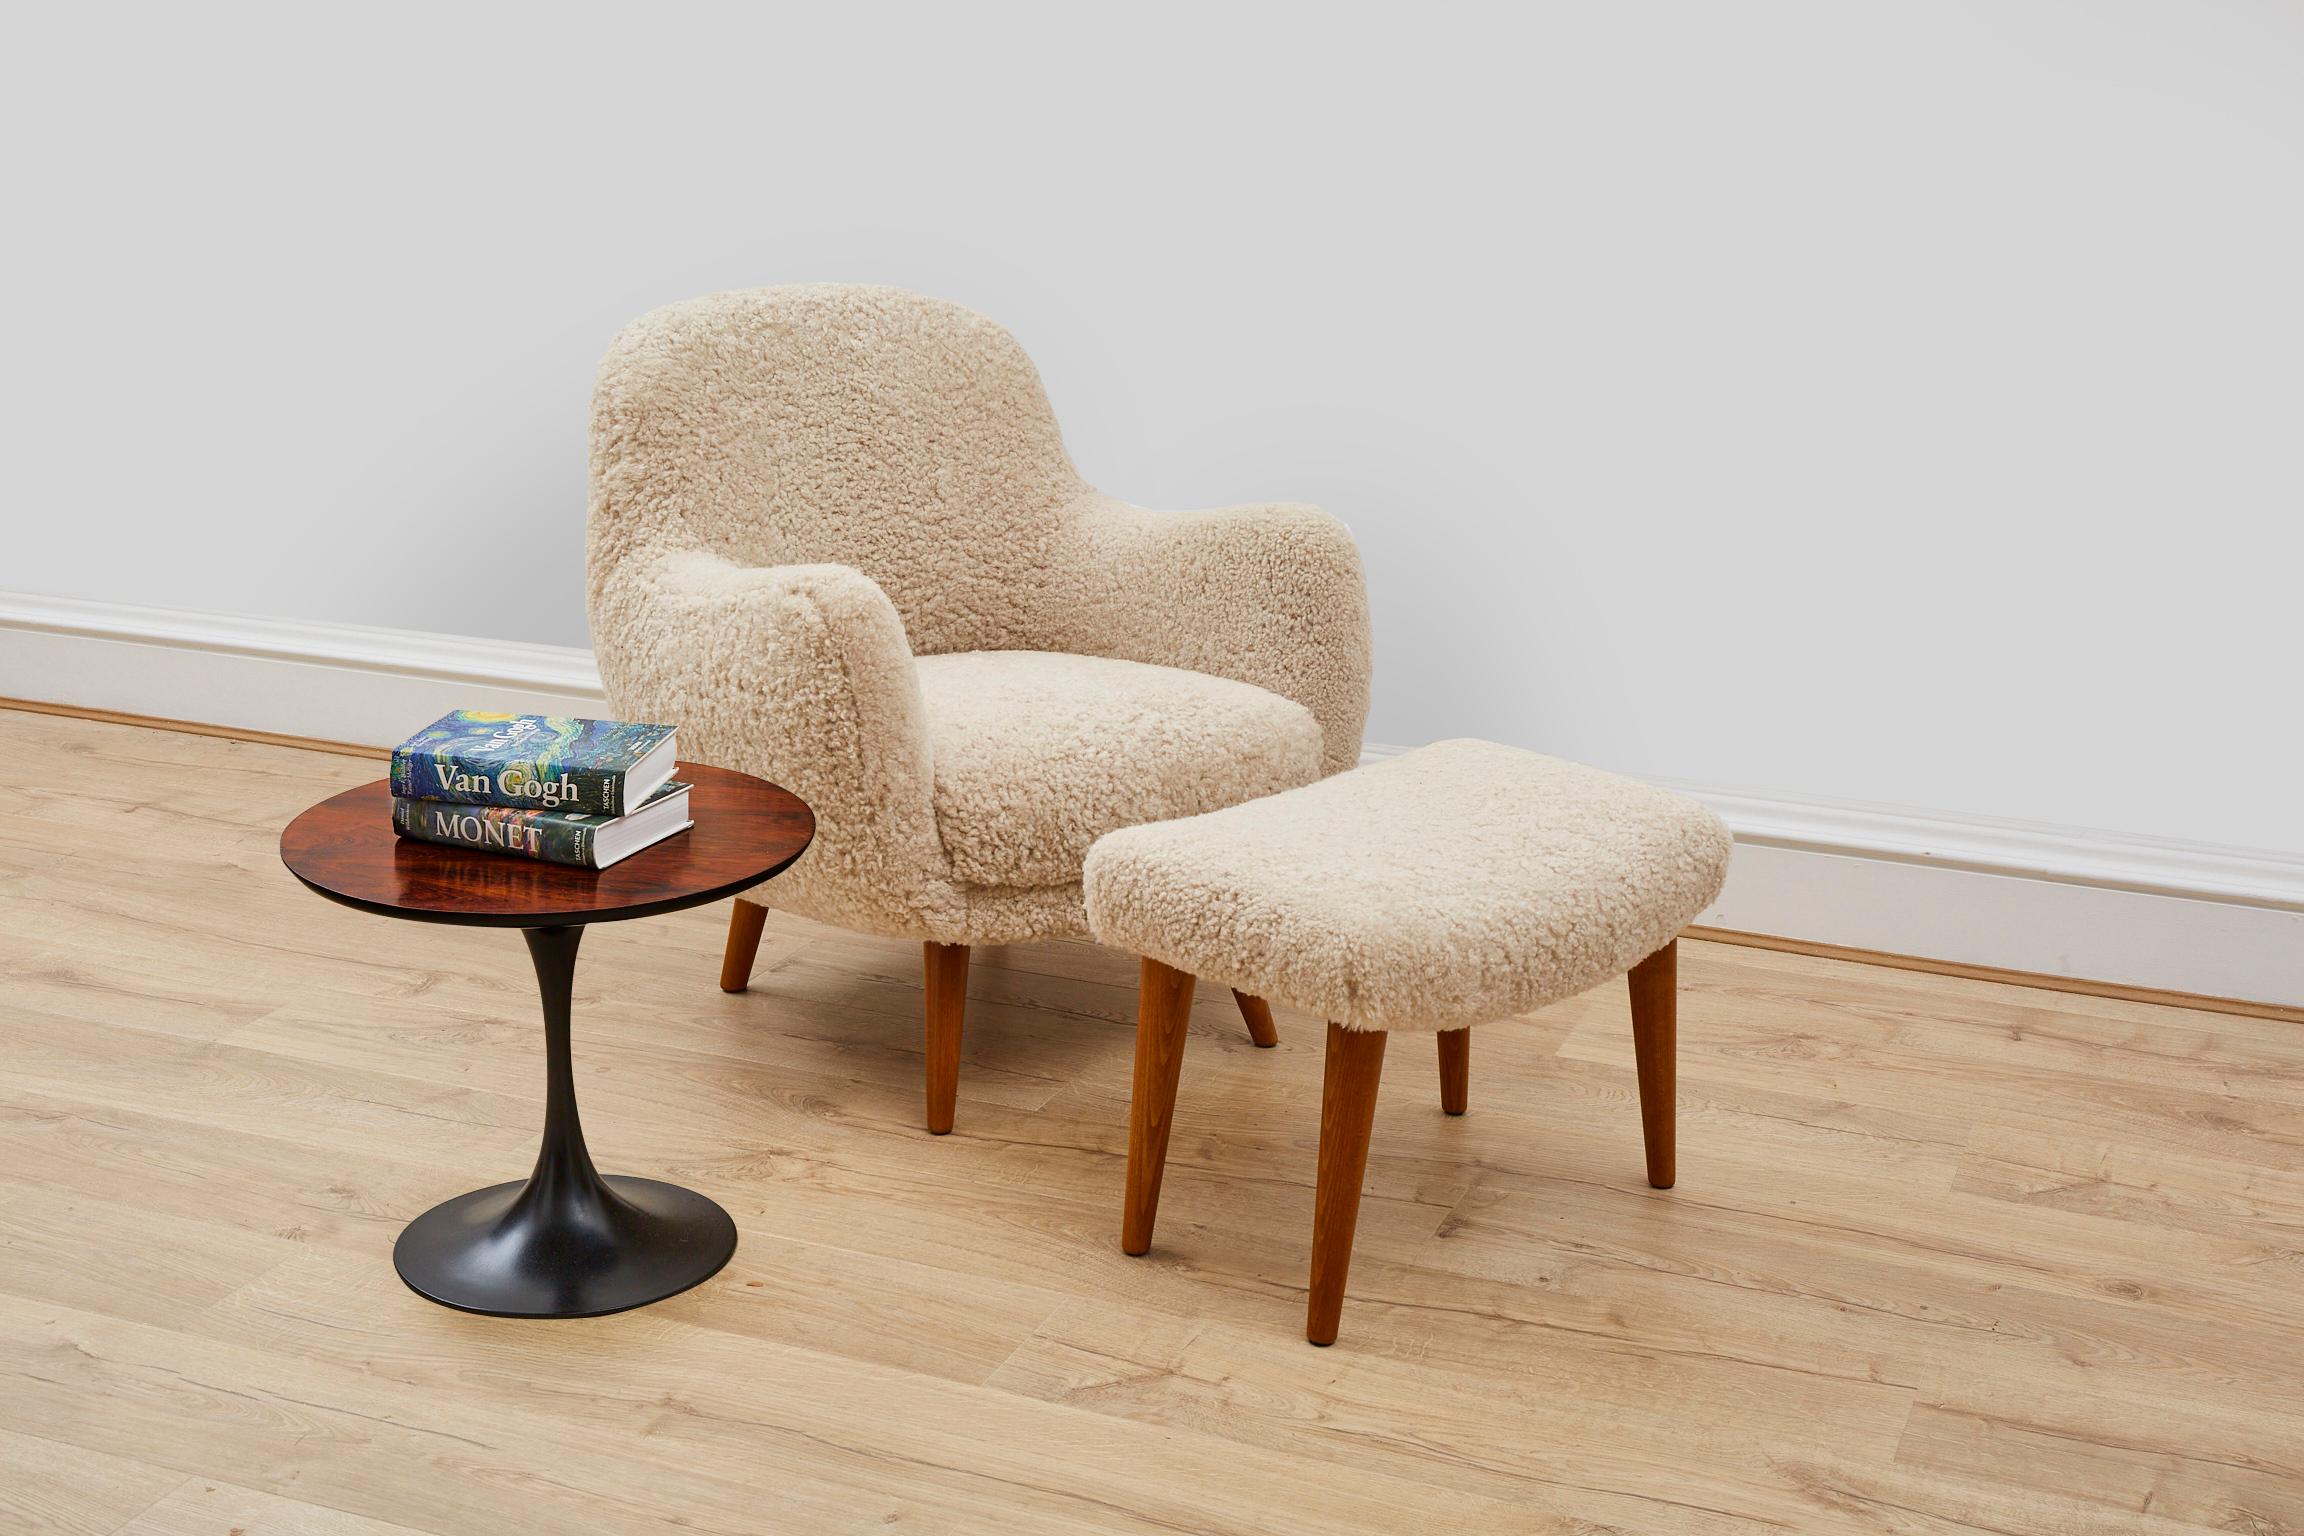 This beautiful contemporary armchair and footstool is handmade exclusively for Antique Modern Mix in the UK, using traditional methods and ethically sourced sheep skin from Scandinavia. 

The frame features a hard wood frame, that has been drilled